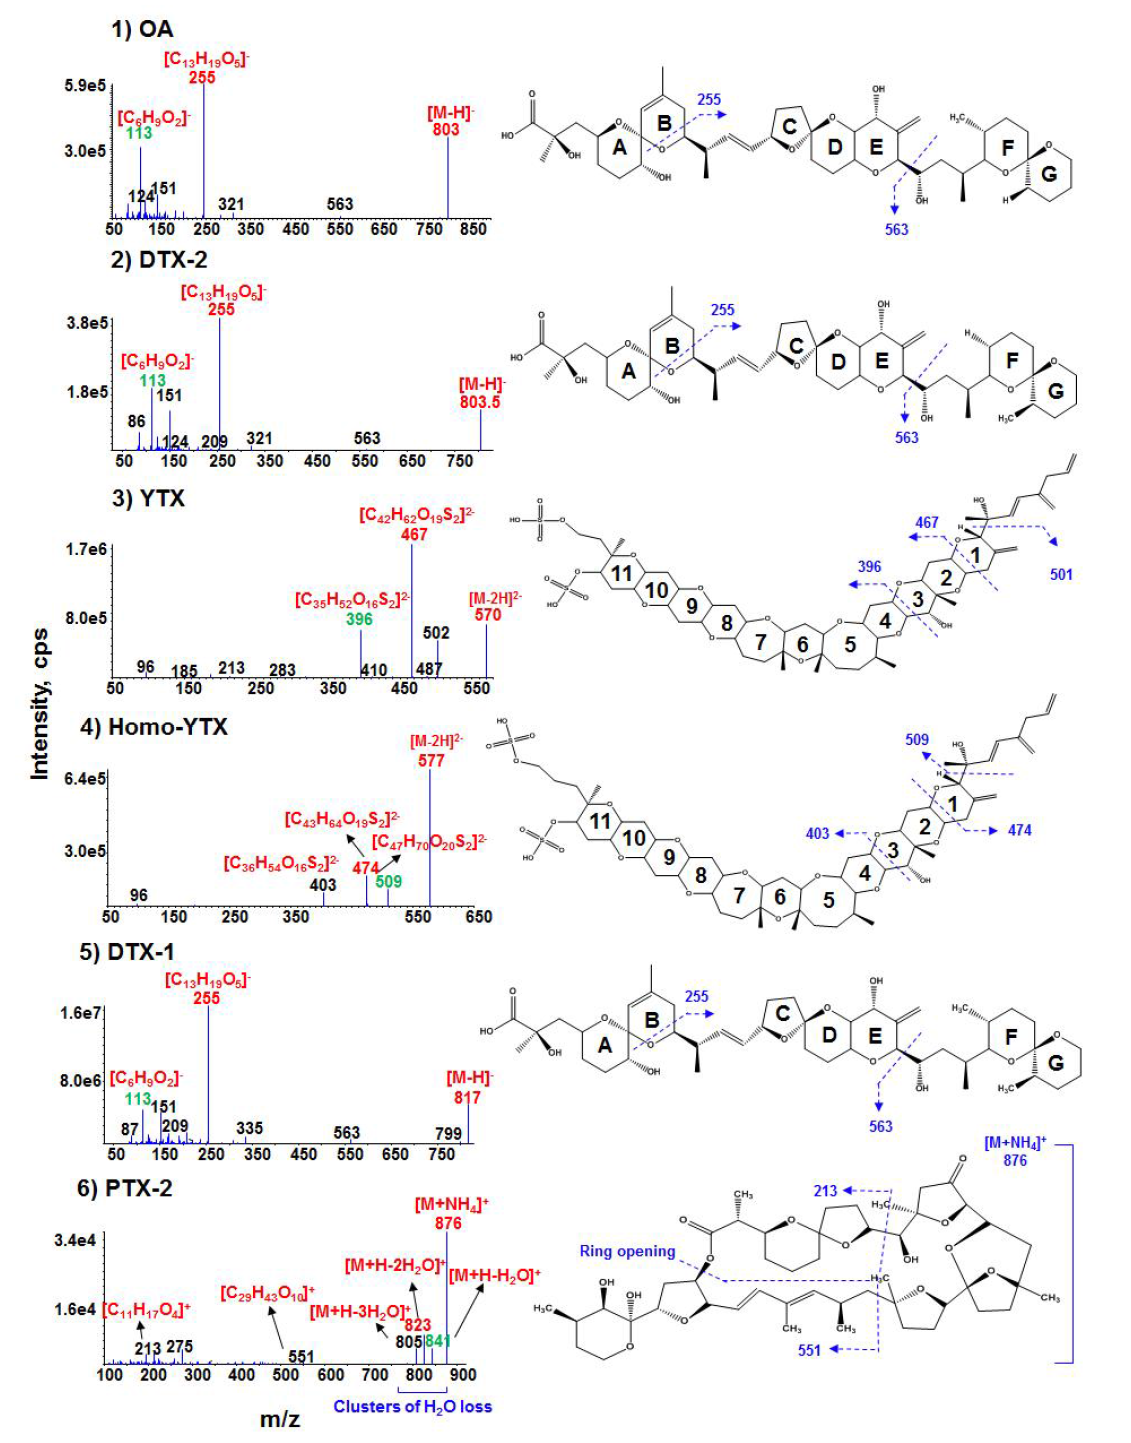 ESI-MS/MS spectra of marine biotoxins by LC-MS/MS in negative and positive ion mode